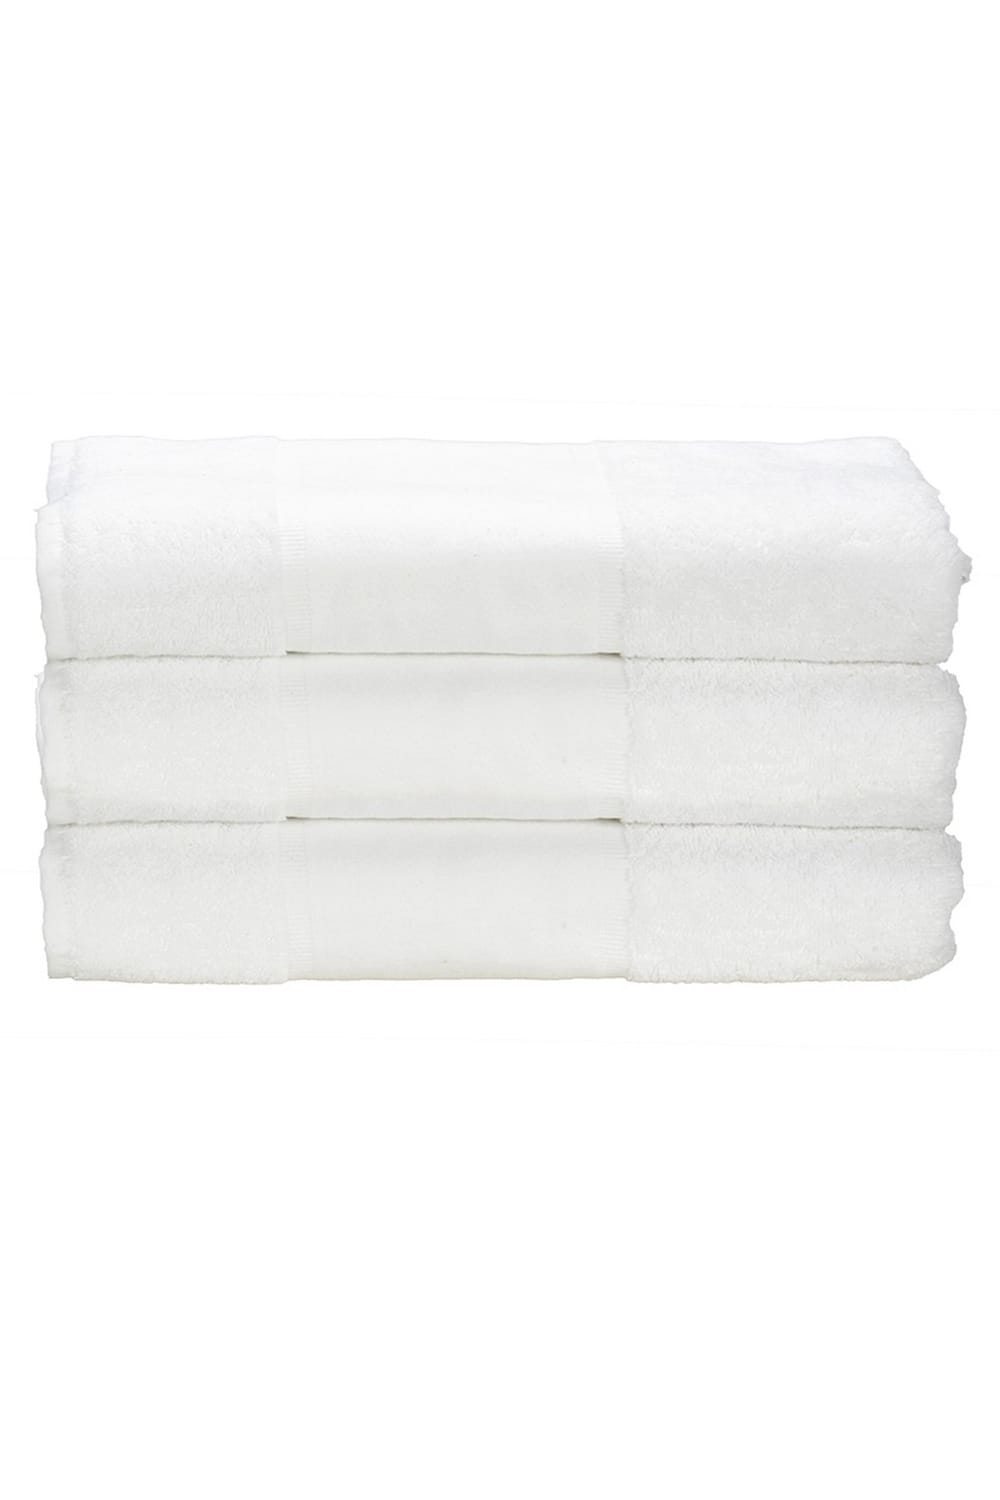 A&R Towels Print-Me Hand Towel (White) (One Size)